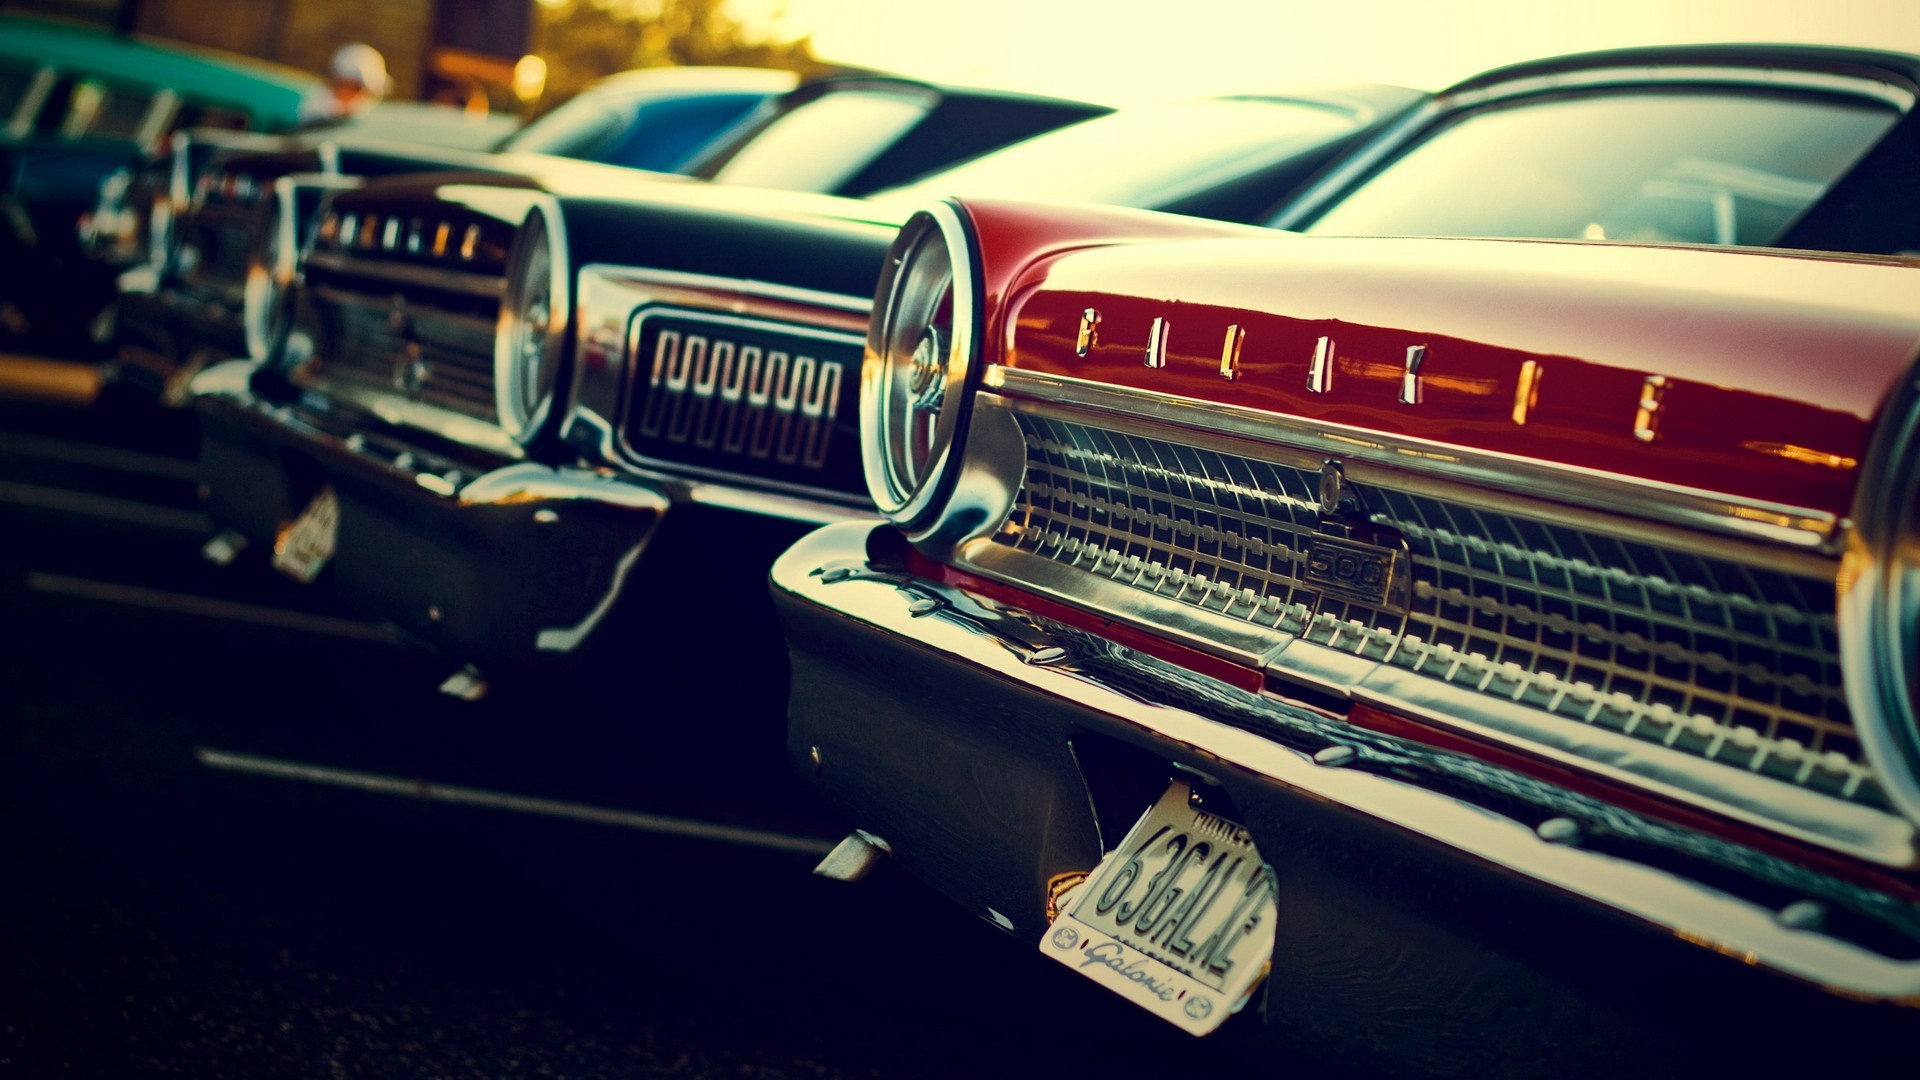 1920x1080 Hd Wallpapers Of Old Cars 52 with Hd Wallpapers Of Old Cars